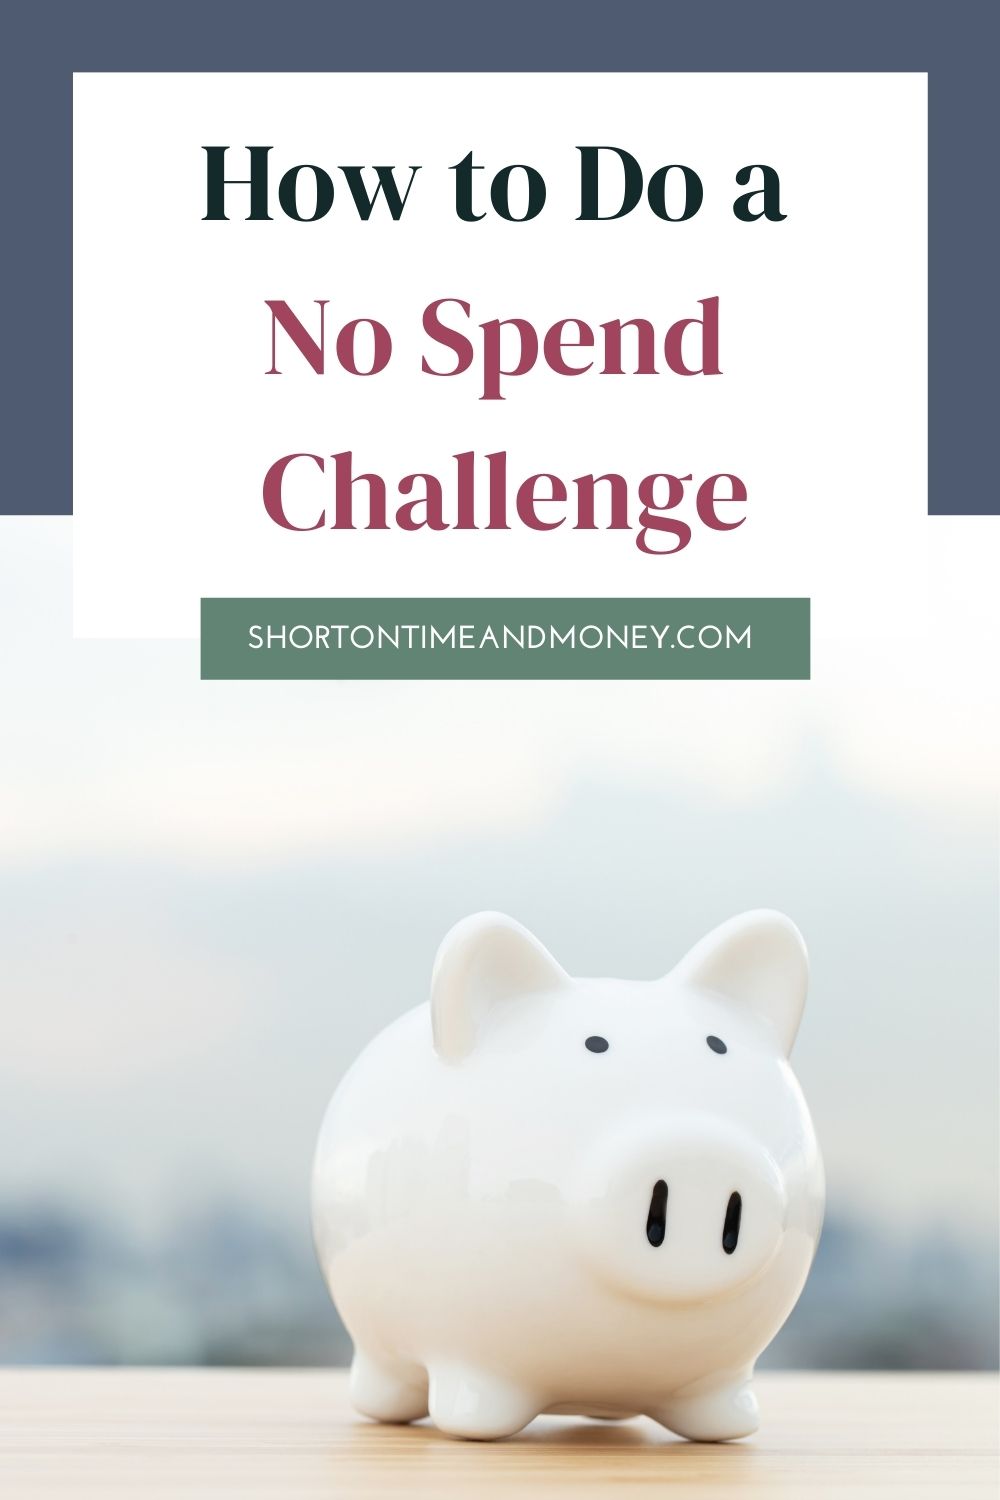 How to Do a No Spend Challenge @ Short On Time and Money